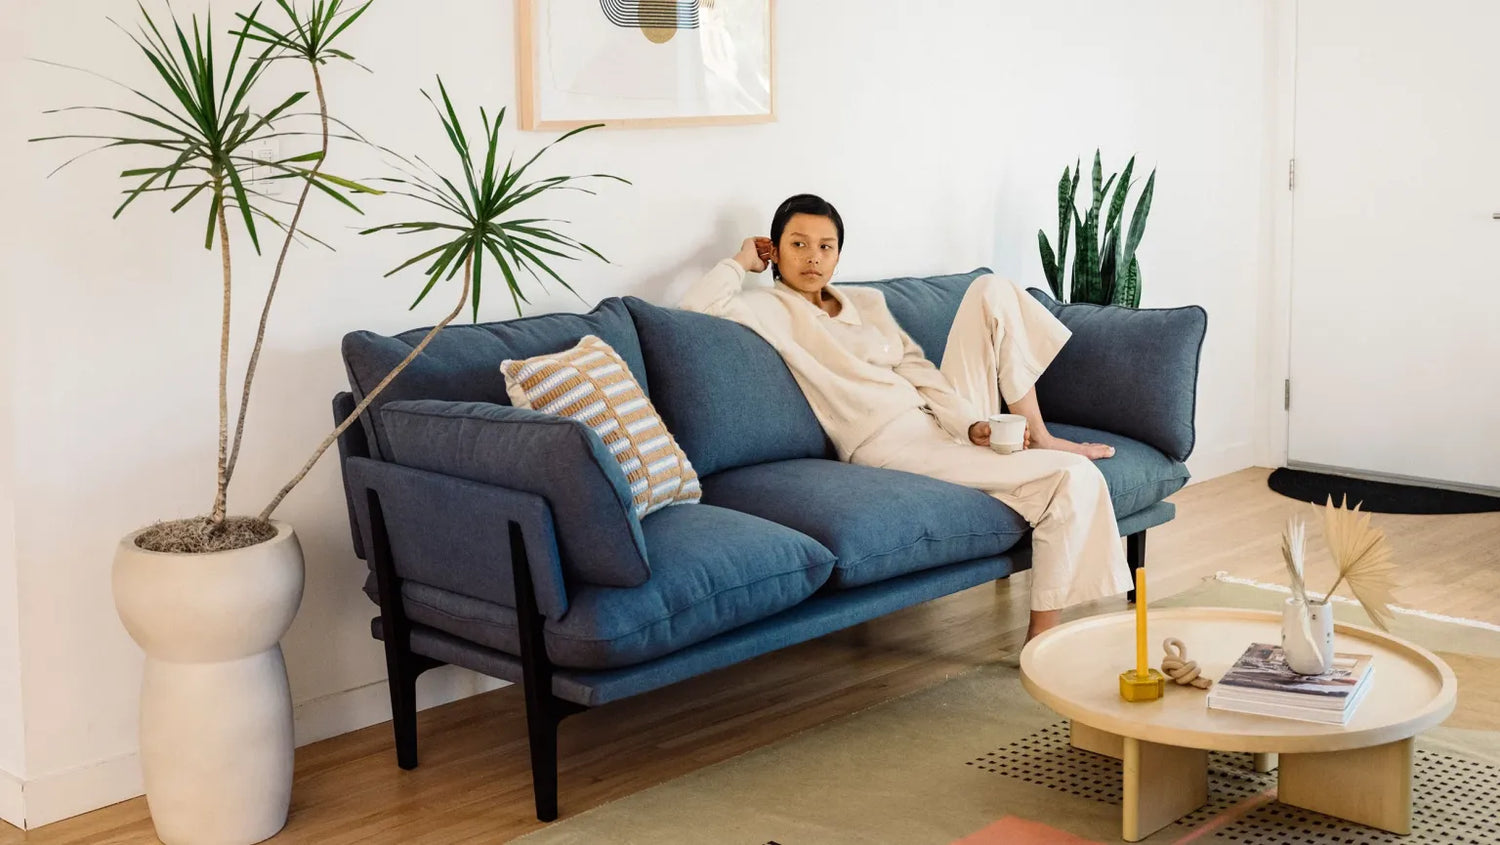 A person lounges on a blue sofa in a modern living room. They are holding a mug and are dressed in light-colored clothes. The room features minimalistic decor with potted plants, a round coffee table with books and candles, and a framed picture on the wall.